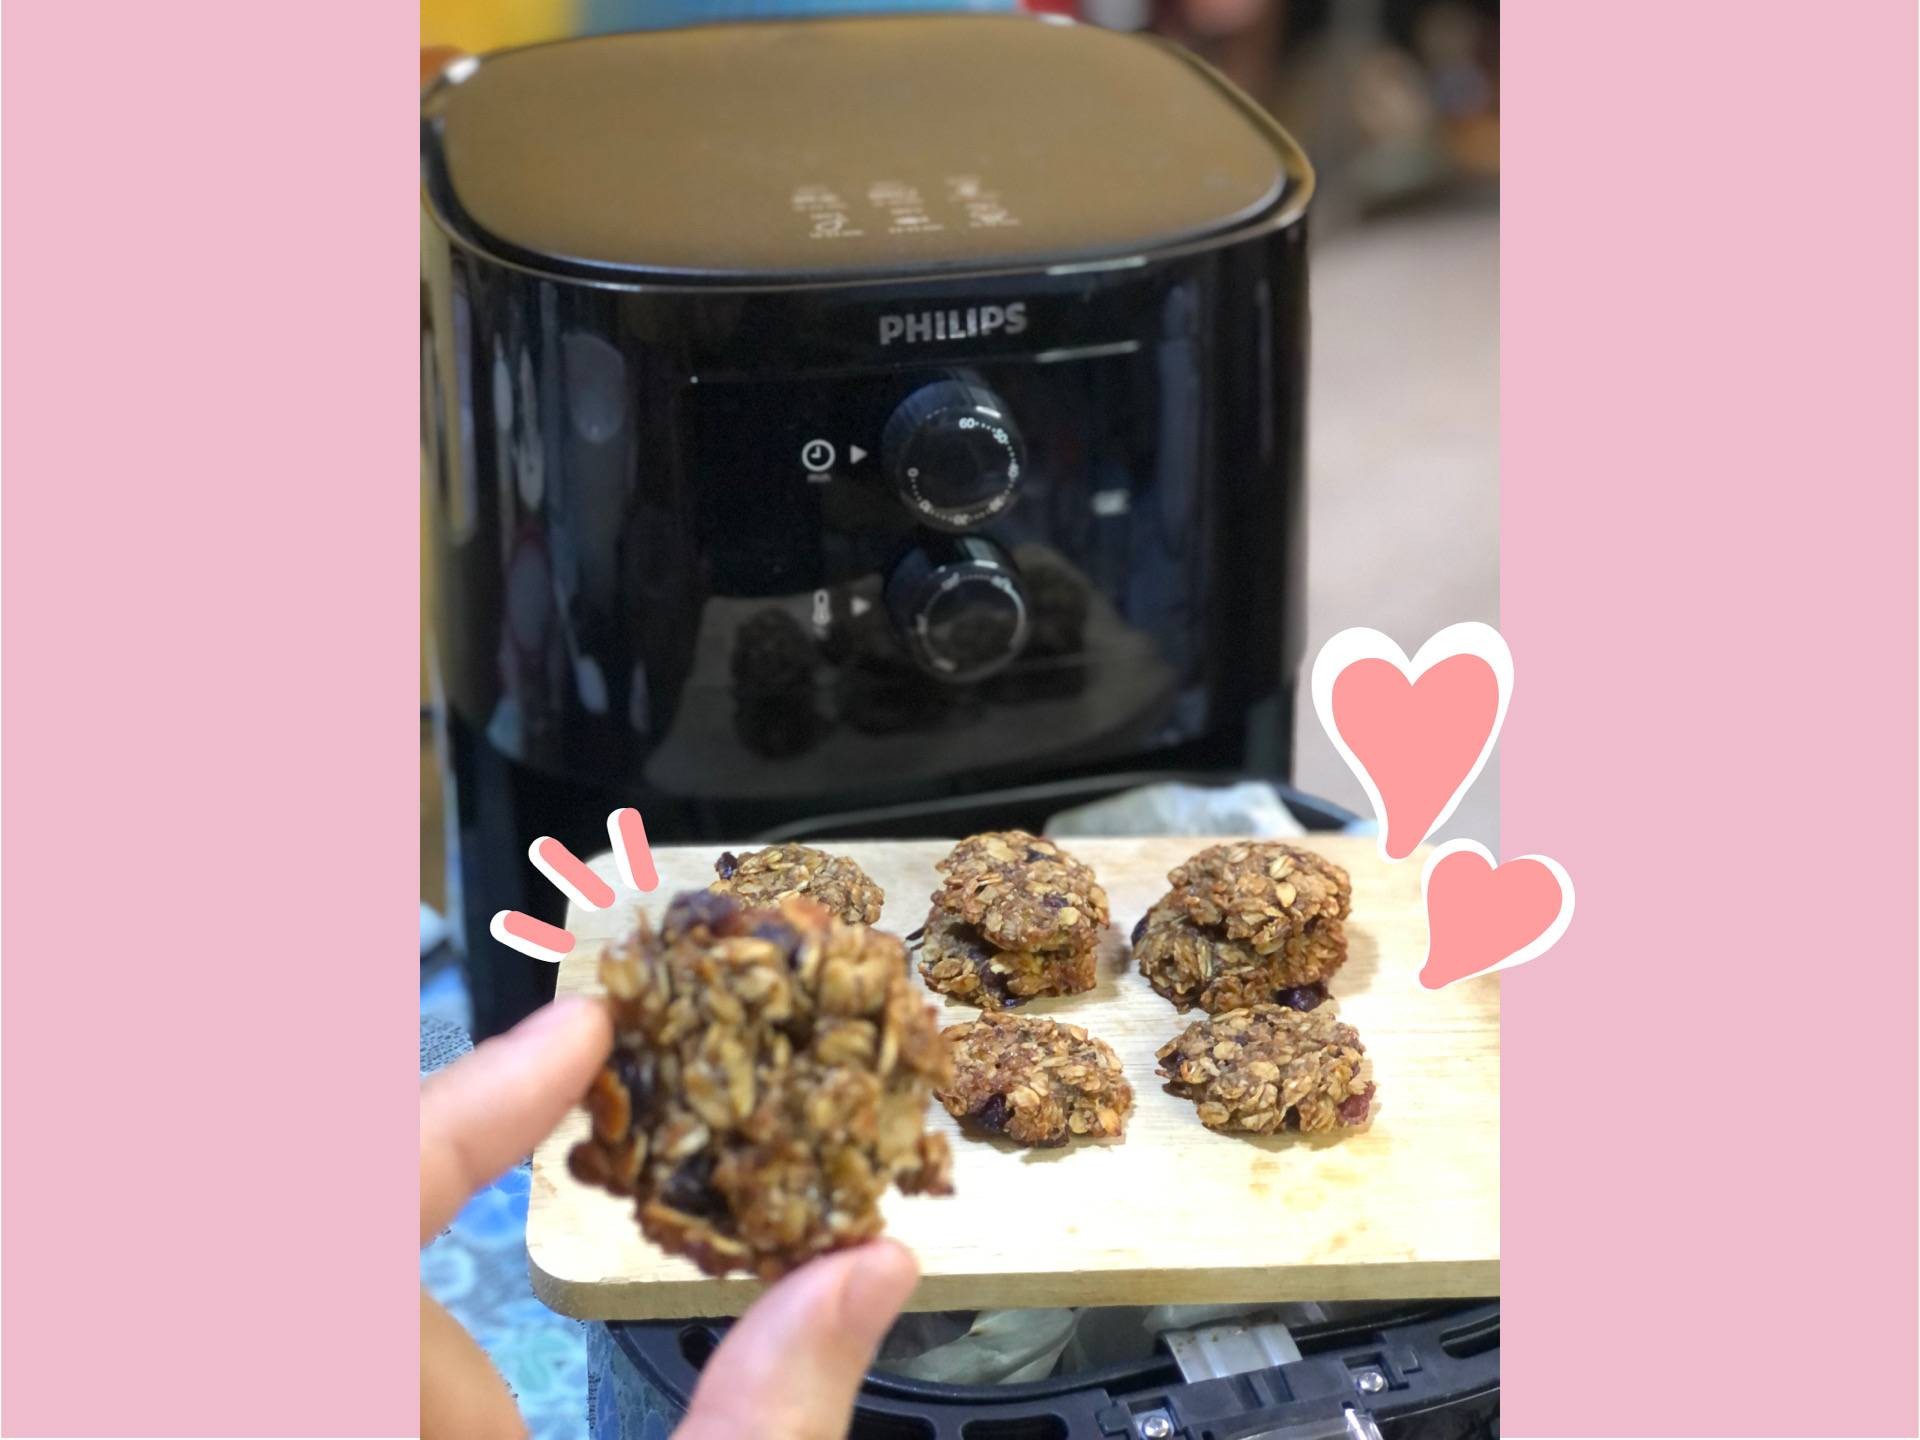 Cranberry Oatmeal Cookies💕 คุกกี้โอ๊ตแครนเบอรี่